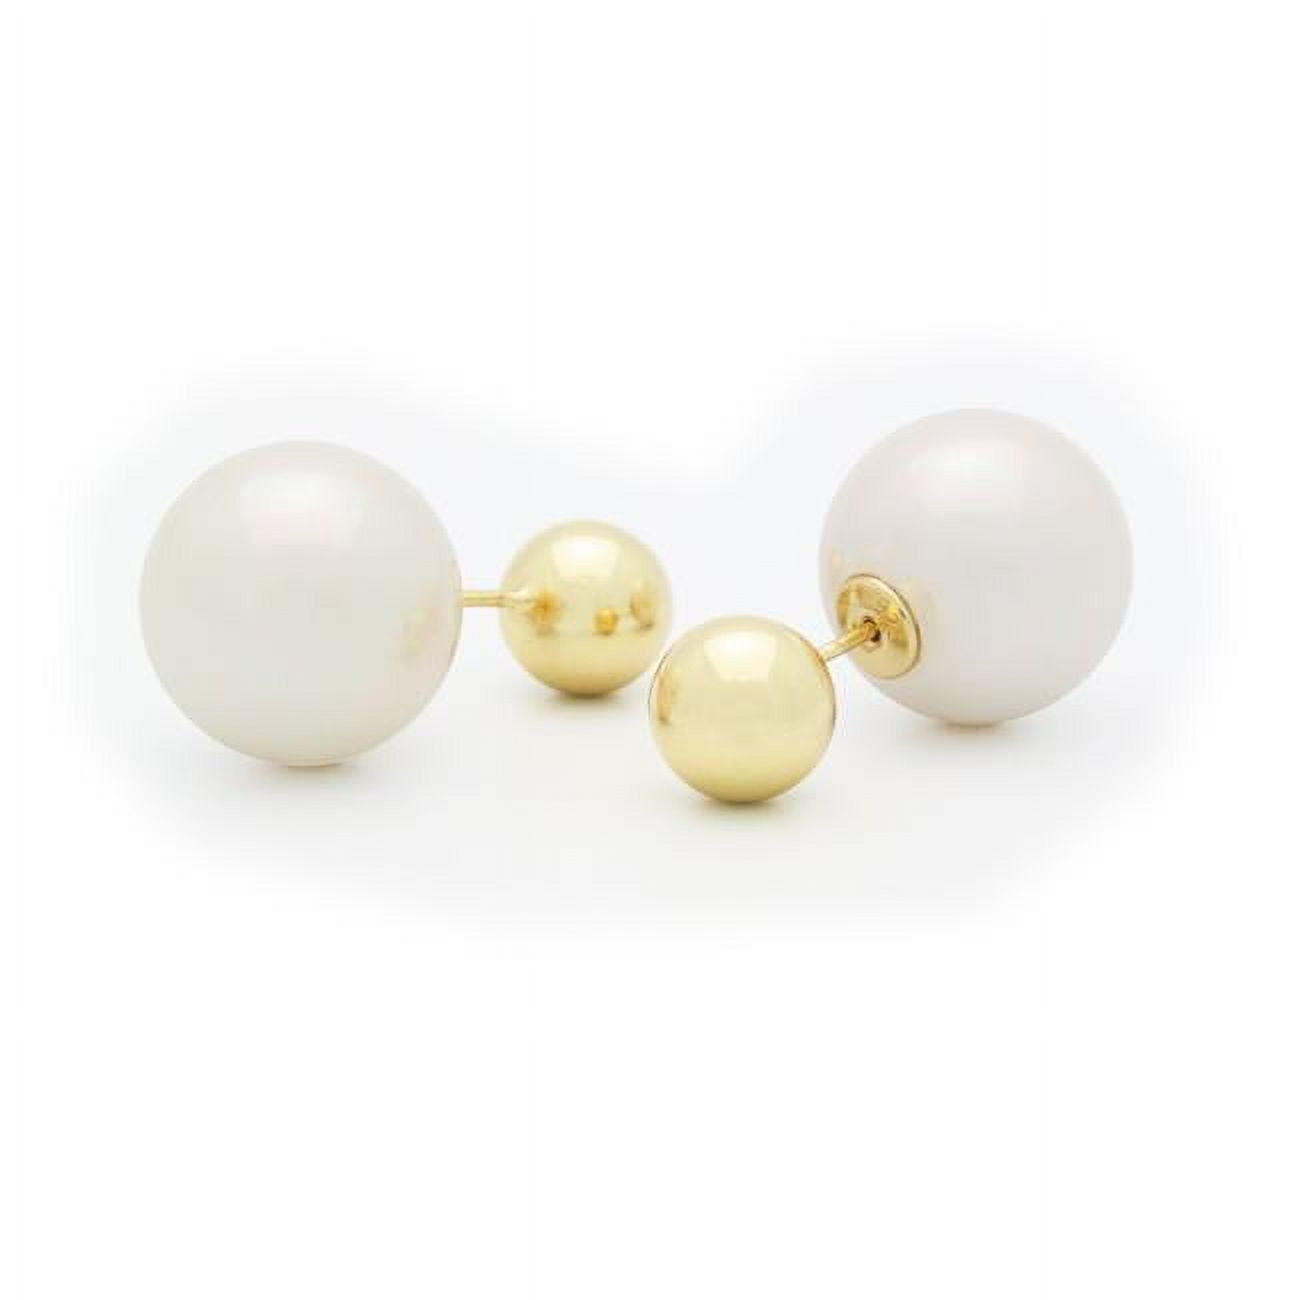 Liaperwg Double Sided Faux Pearl Tribal Earrings - Gold Plated 925 Sterling Silver